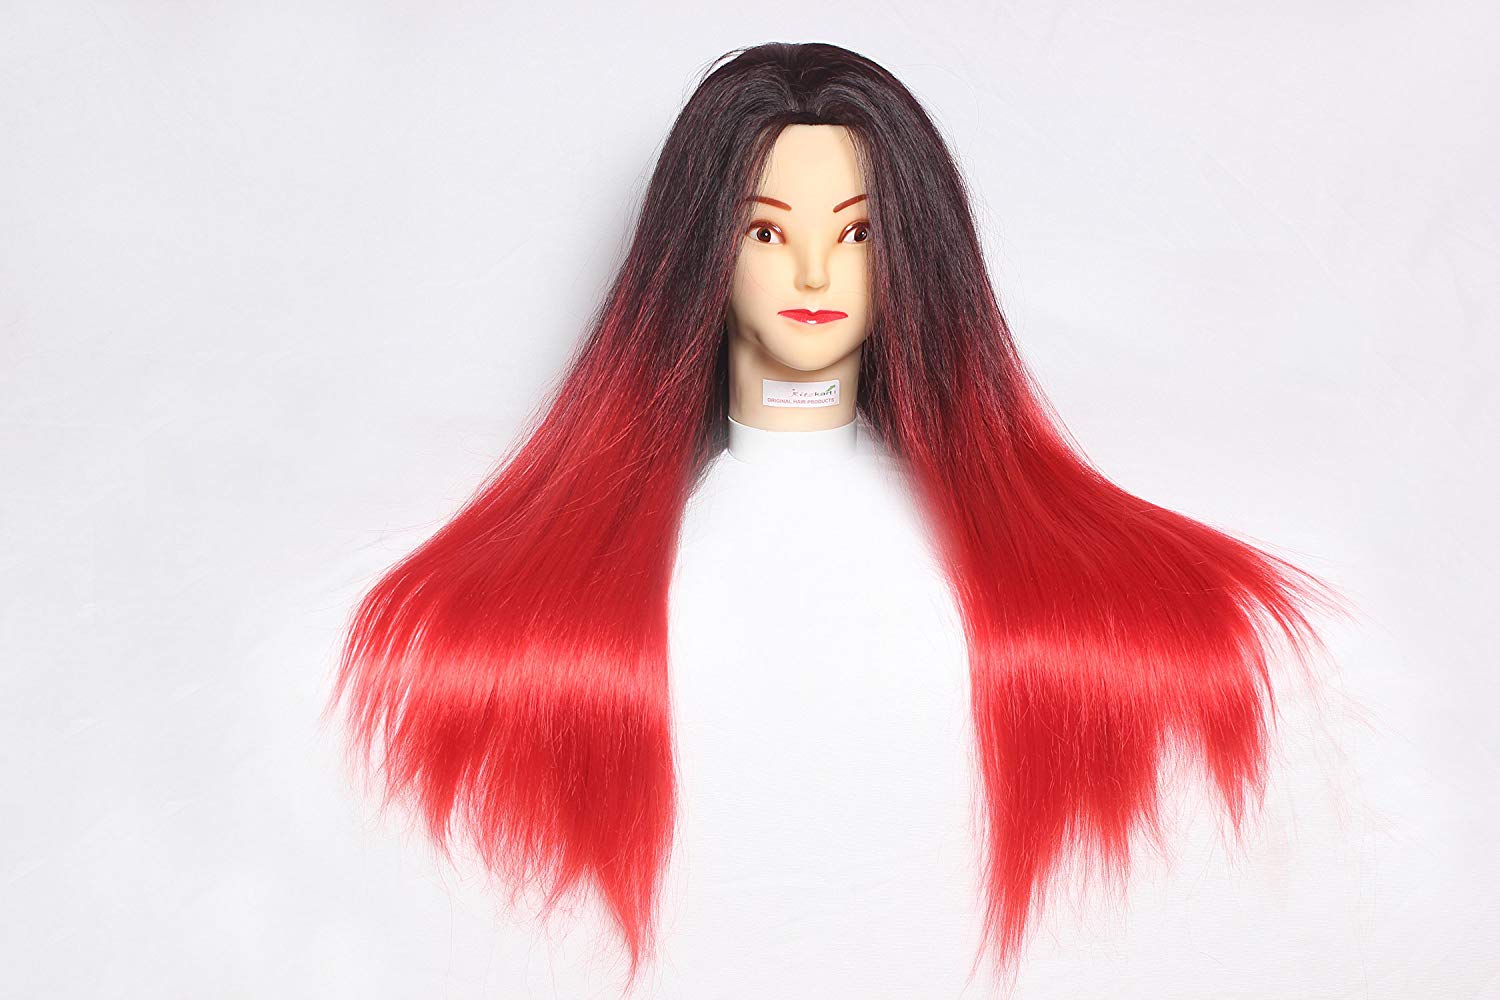 27 Inch Black and Red Mix soft & Long Straight Hair Synthetic Hair dummy for Practice / Cutting / styling For Trainers..